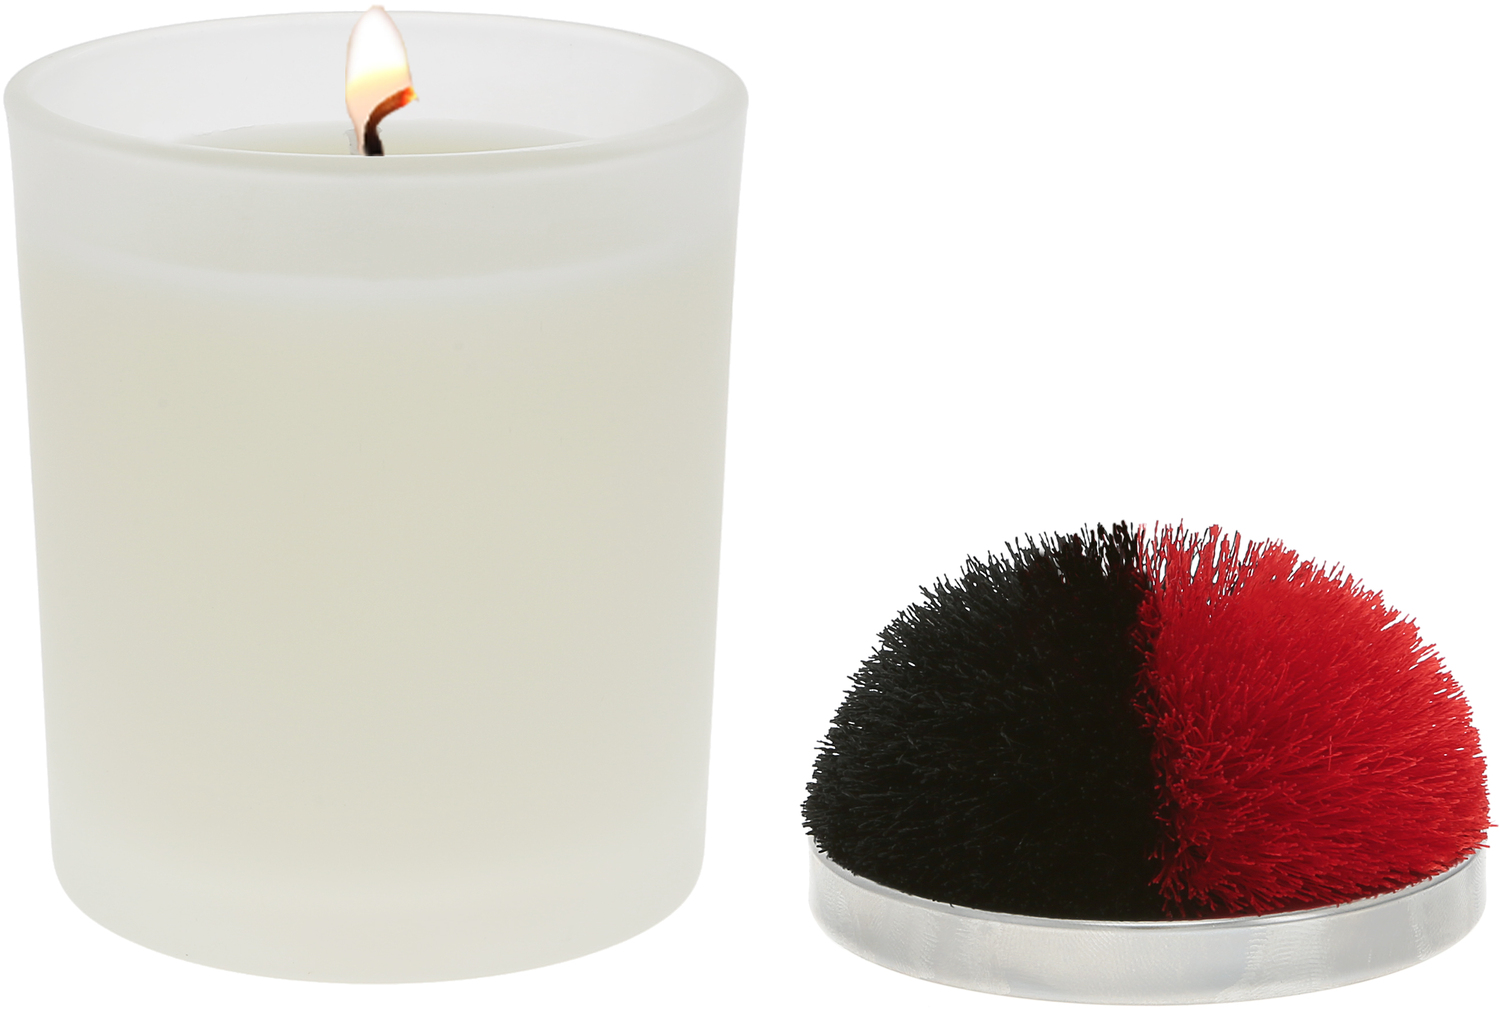 Blank - Red & Black by Repre-Scent - Blank - Red & Black - 5.5 oz - 100% Soy Wax Candle with Pom Pom Lid
Scent: Tranquility